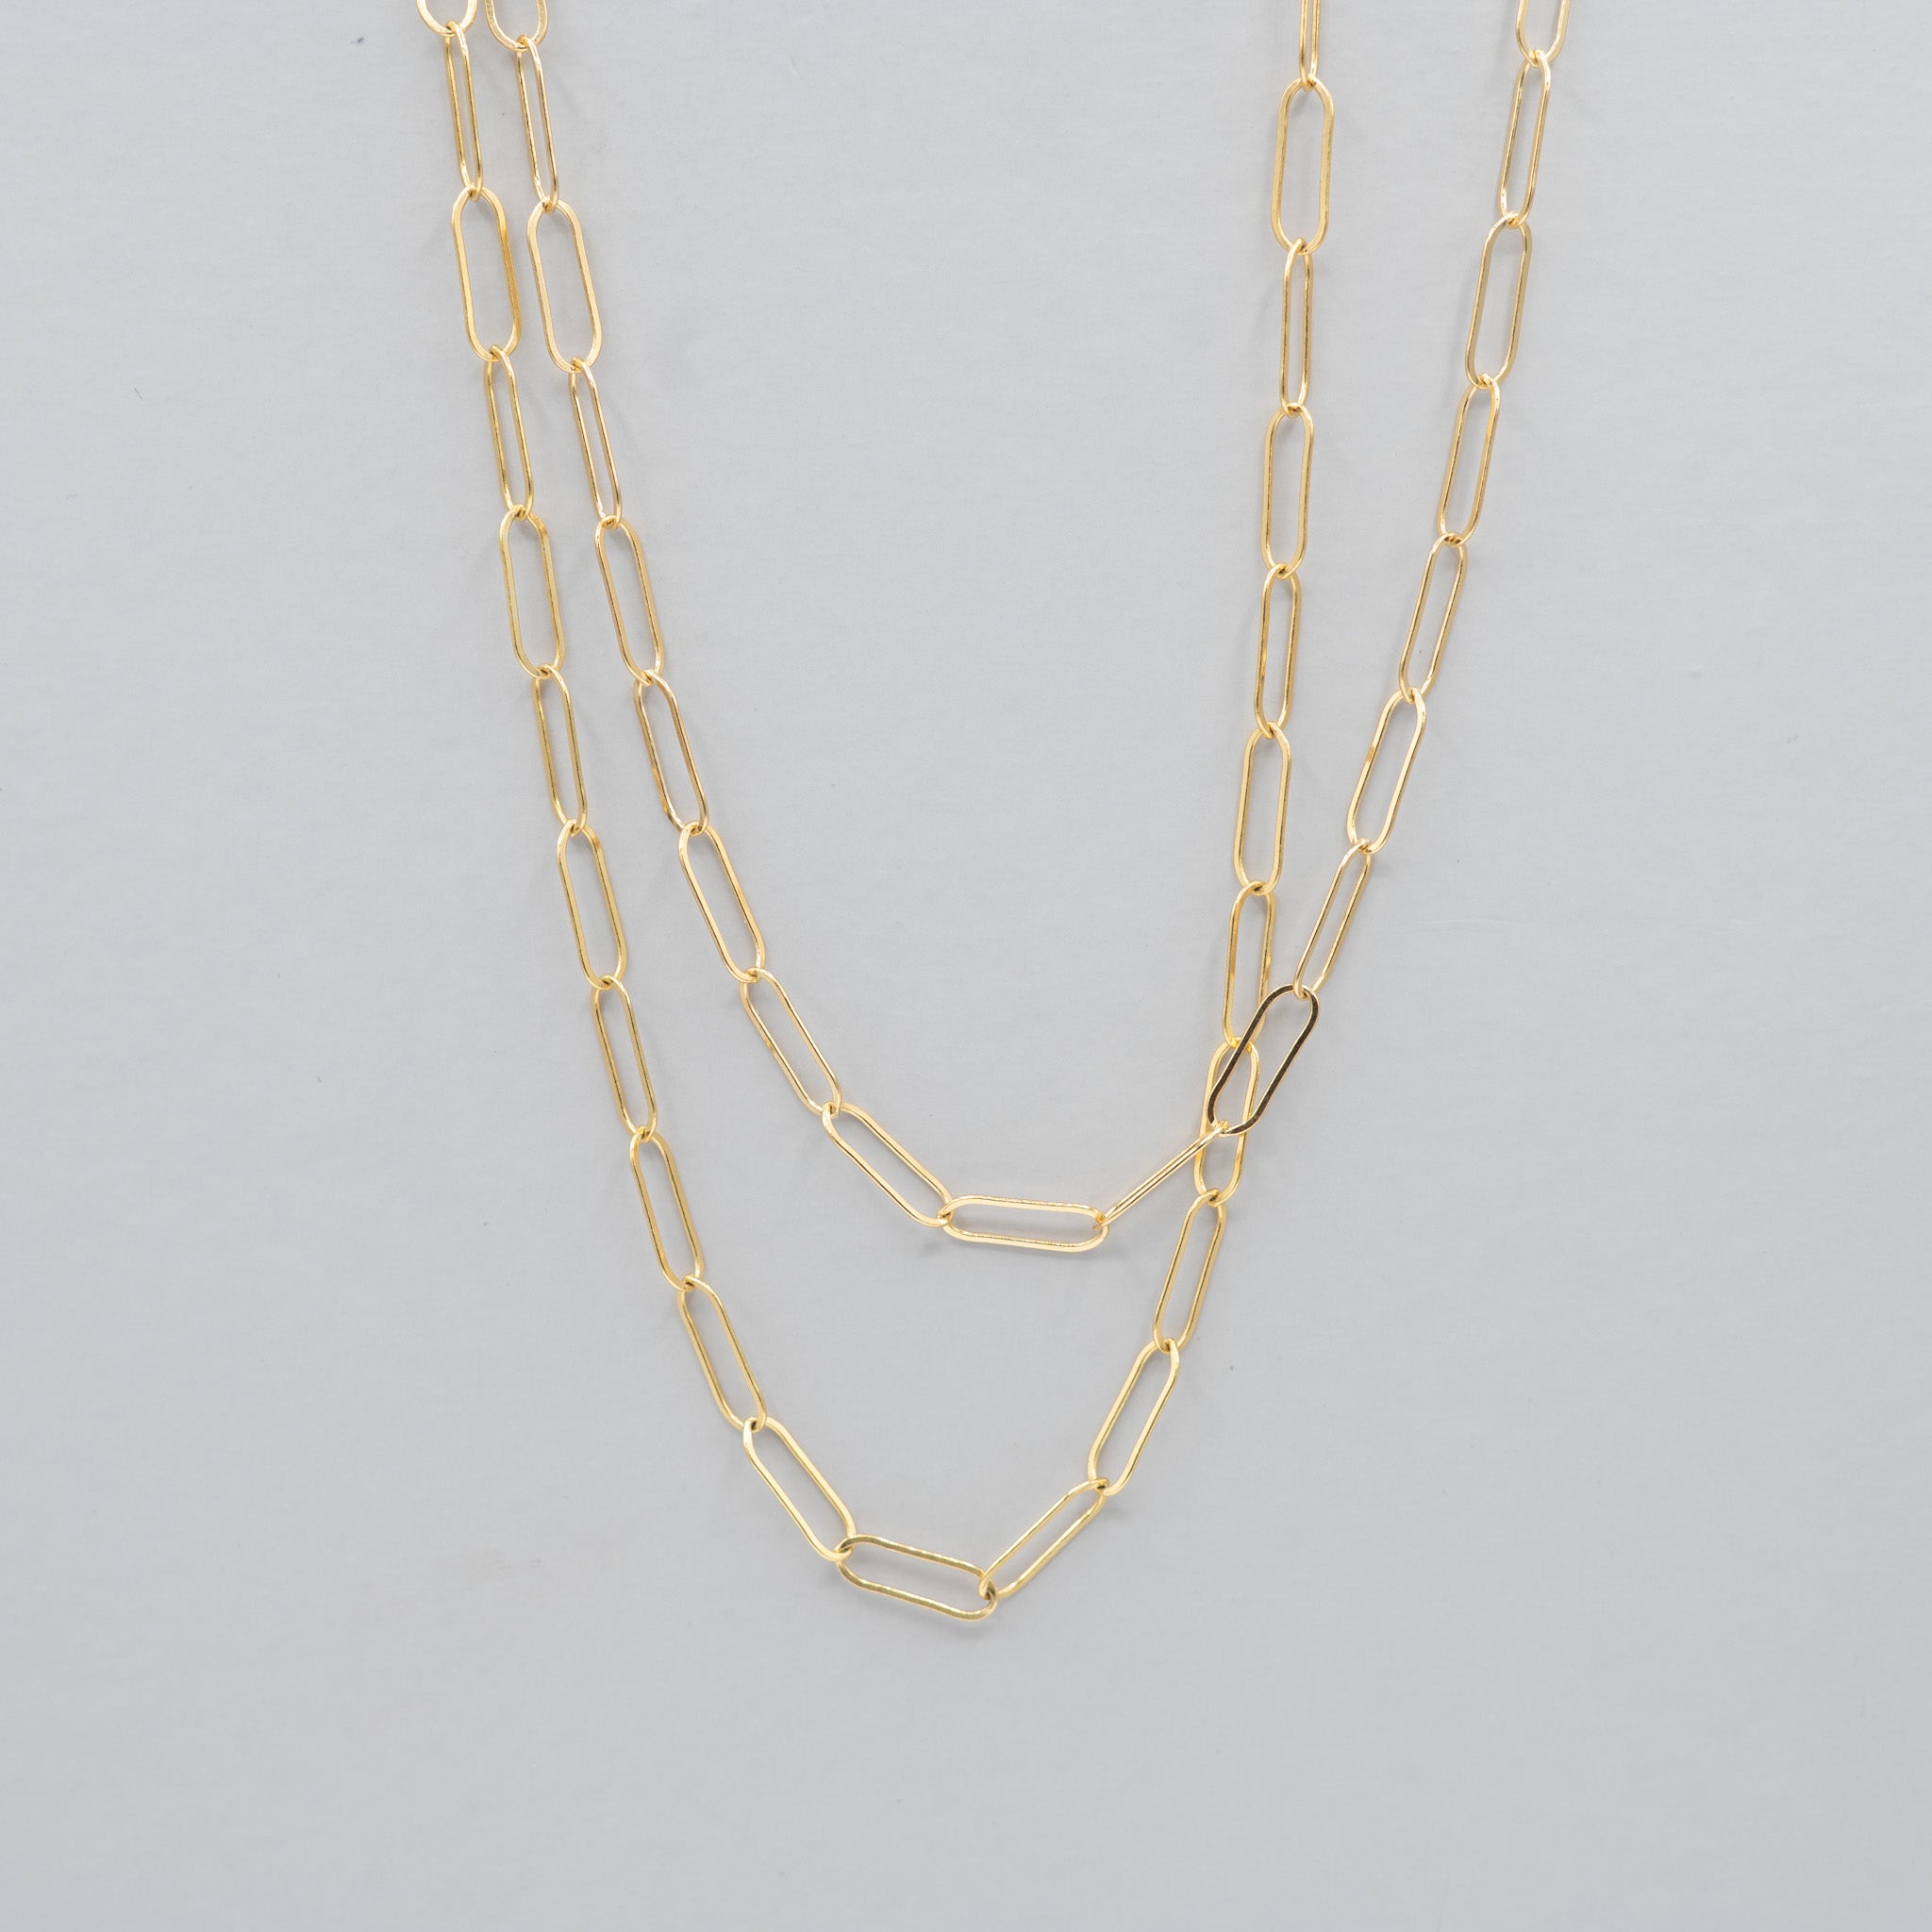 14k Gold Filled Extra Large Paper Clip Long Layering Chain - Jewel Ya